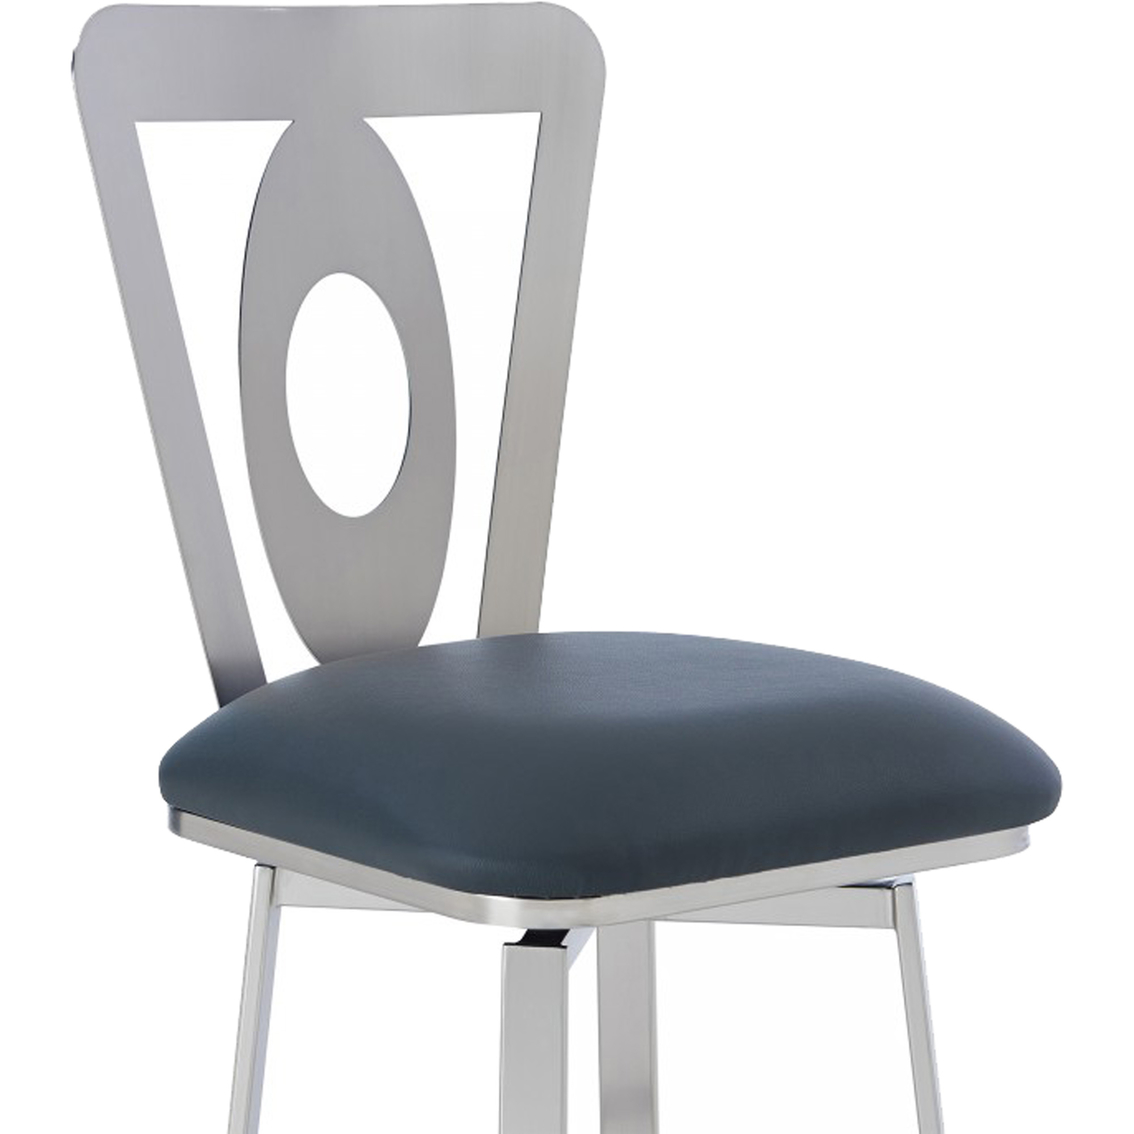 Armen Living Lola Barstool in Brushed Stainless Steel Finish and Grey Faux Leather - Image 4 of 7